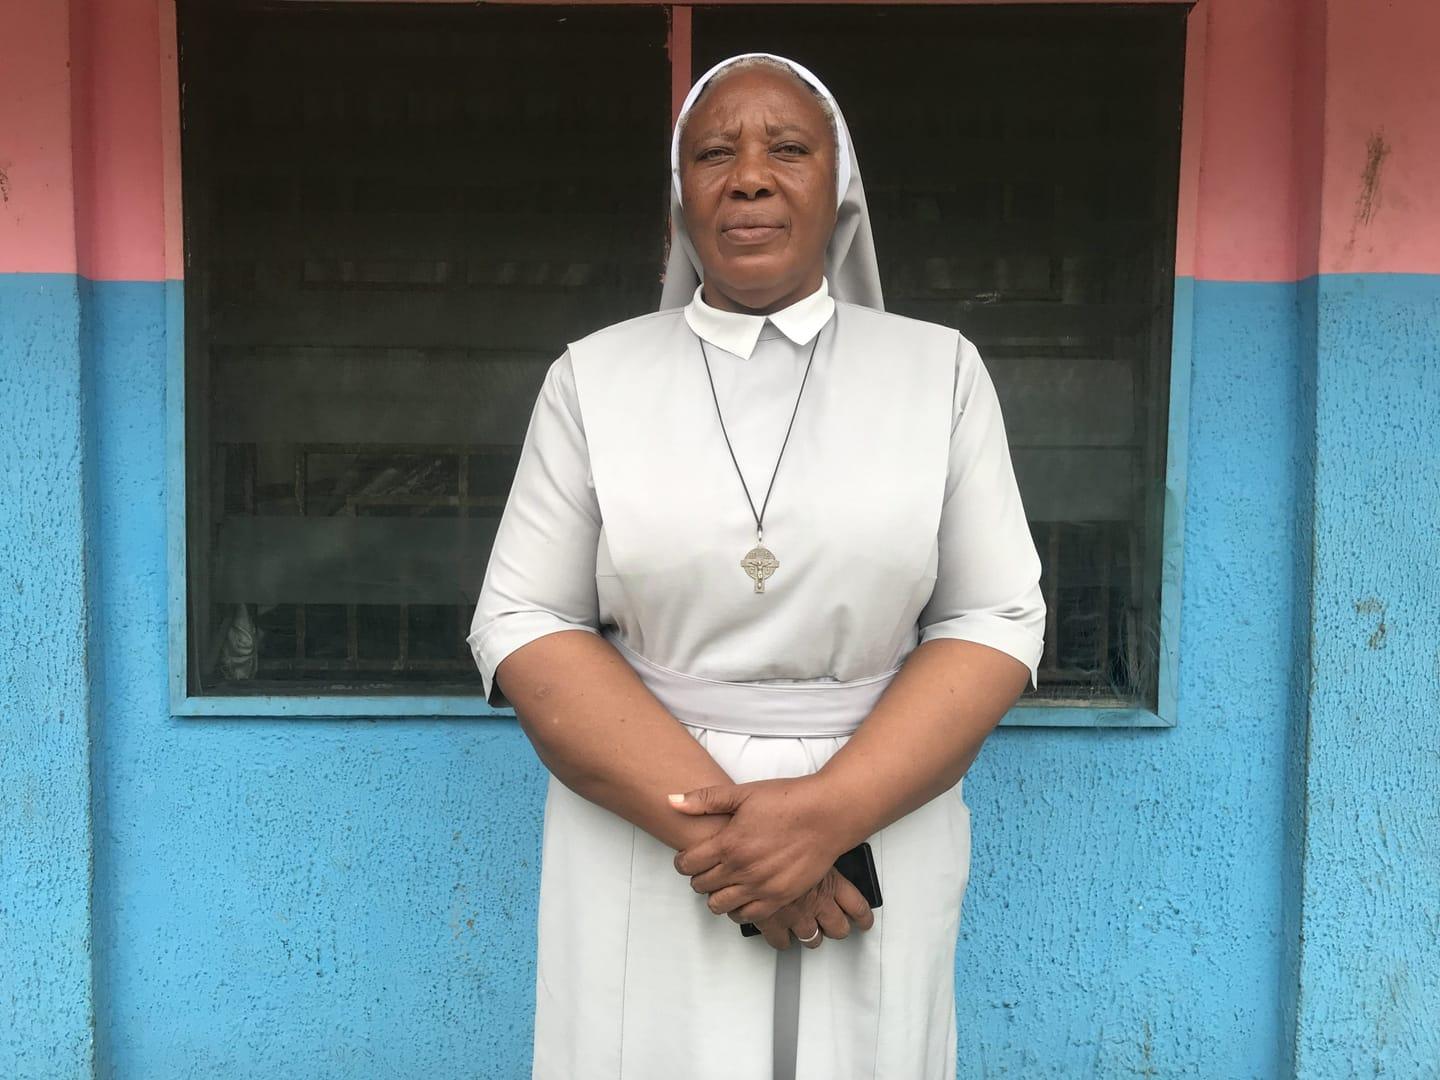 In Nigeria, nun cares for abandoned children labeled as witches